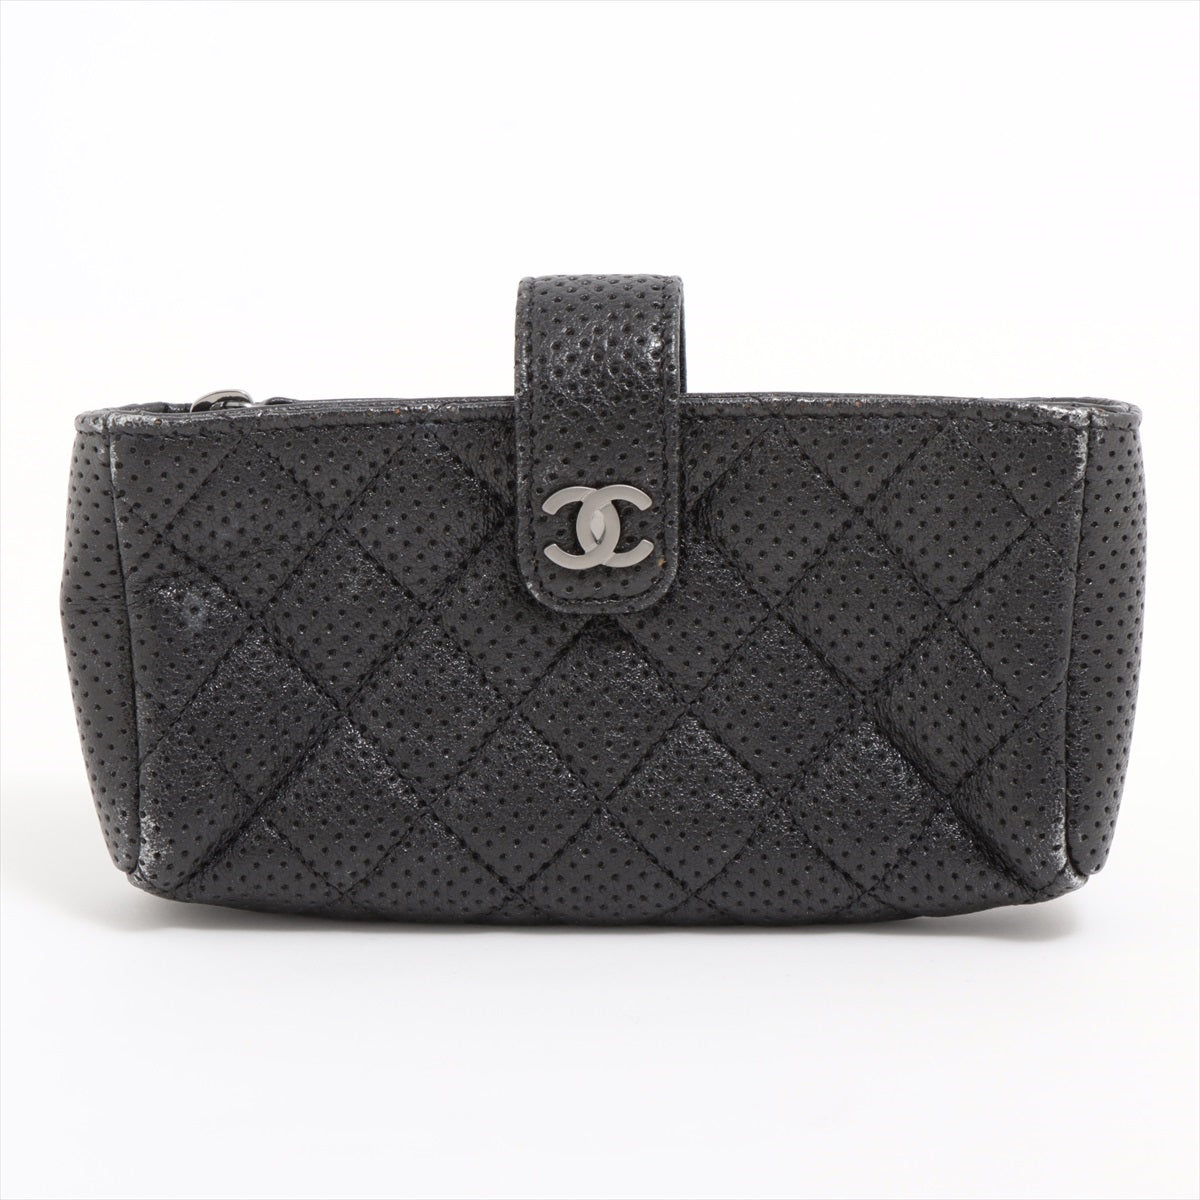 Chanel Matelasse Punching leather Pouch Black Silver Metal fittings 20XXXXXX